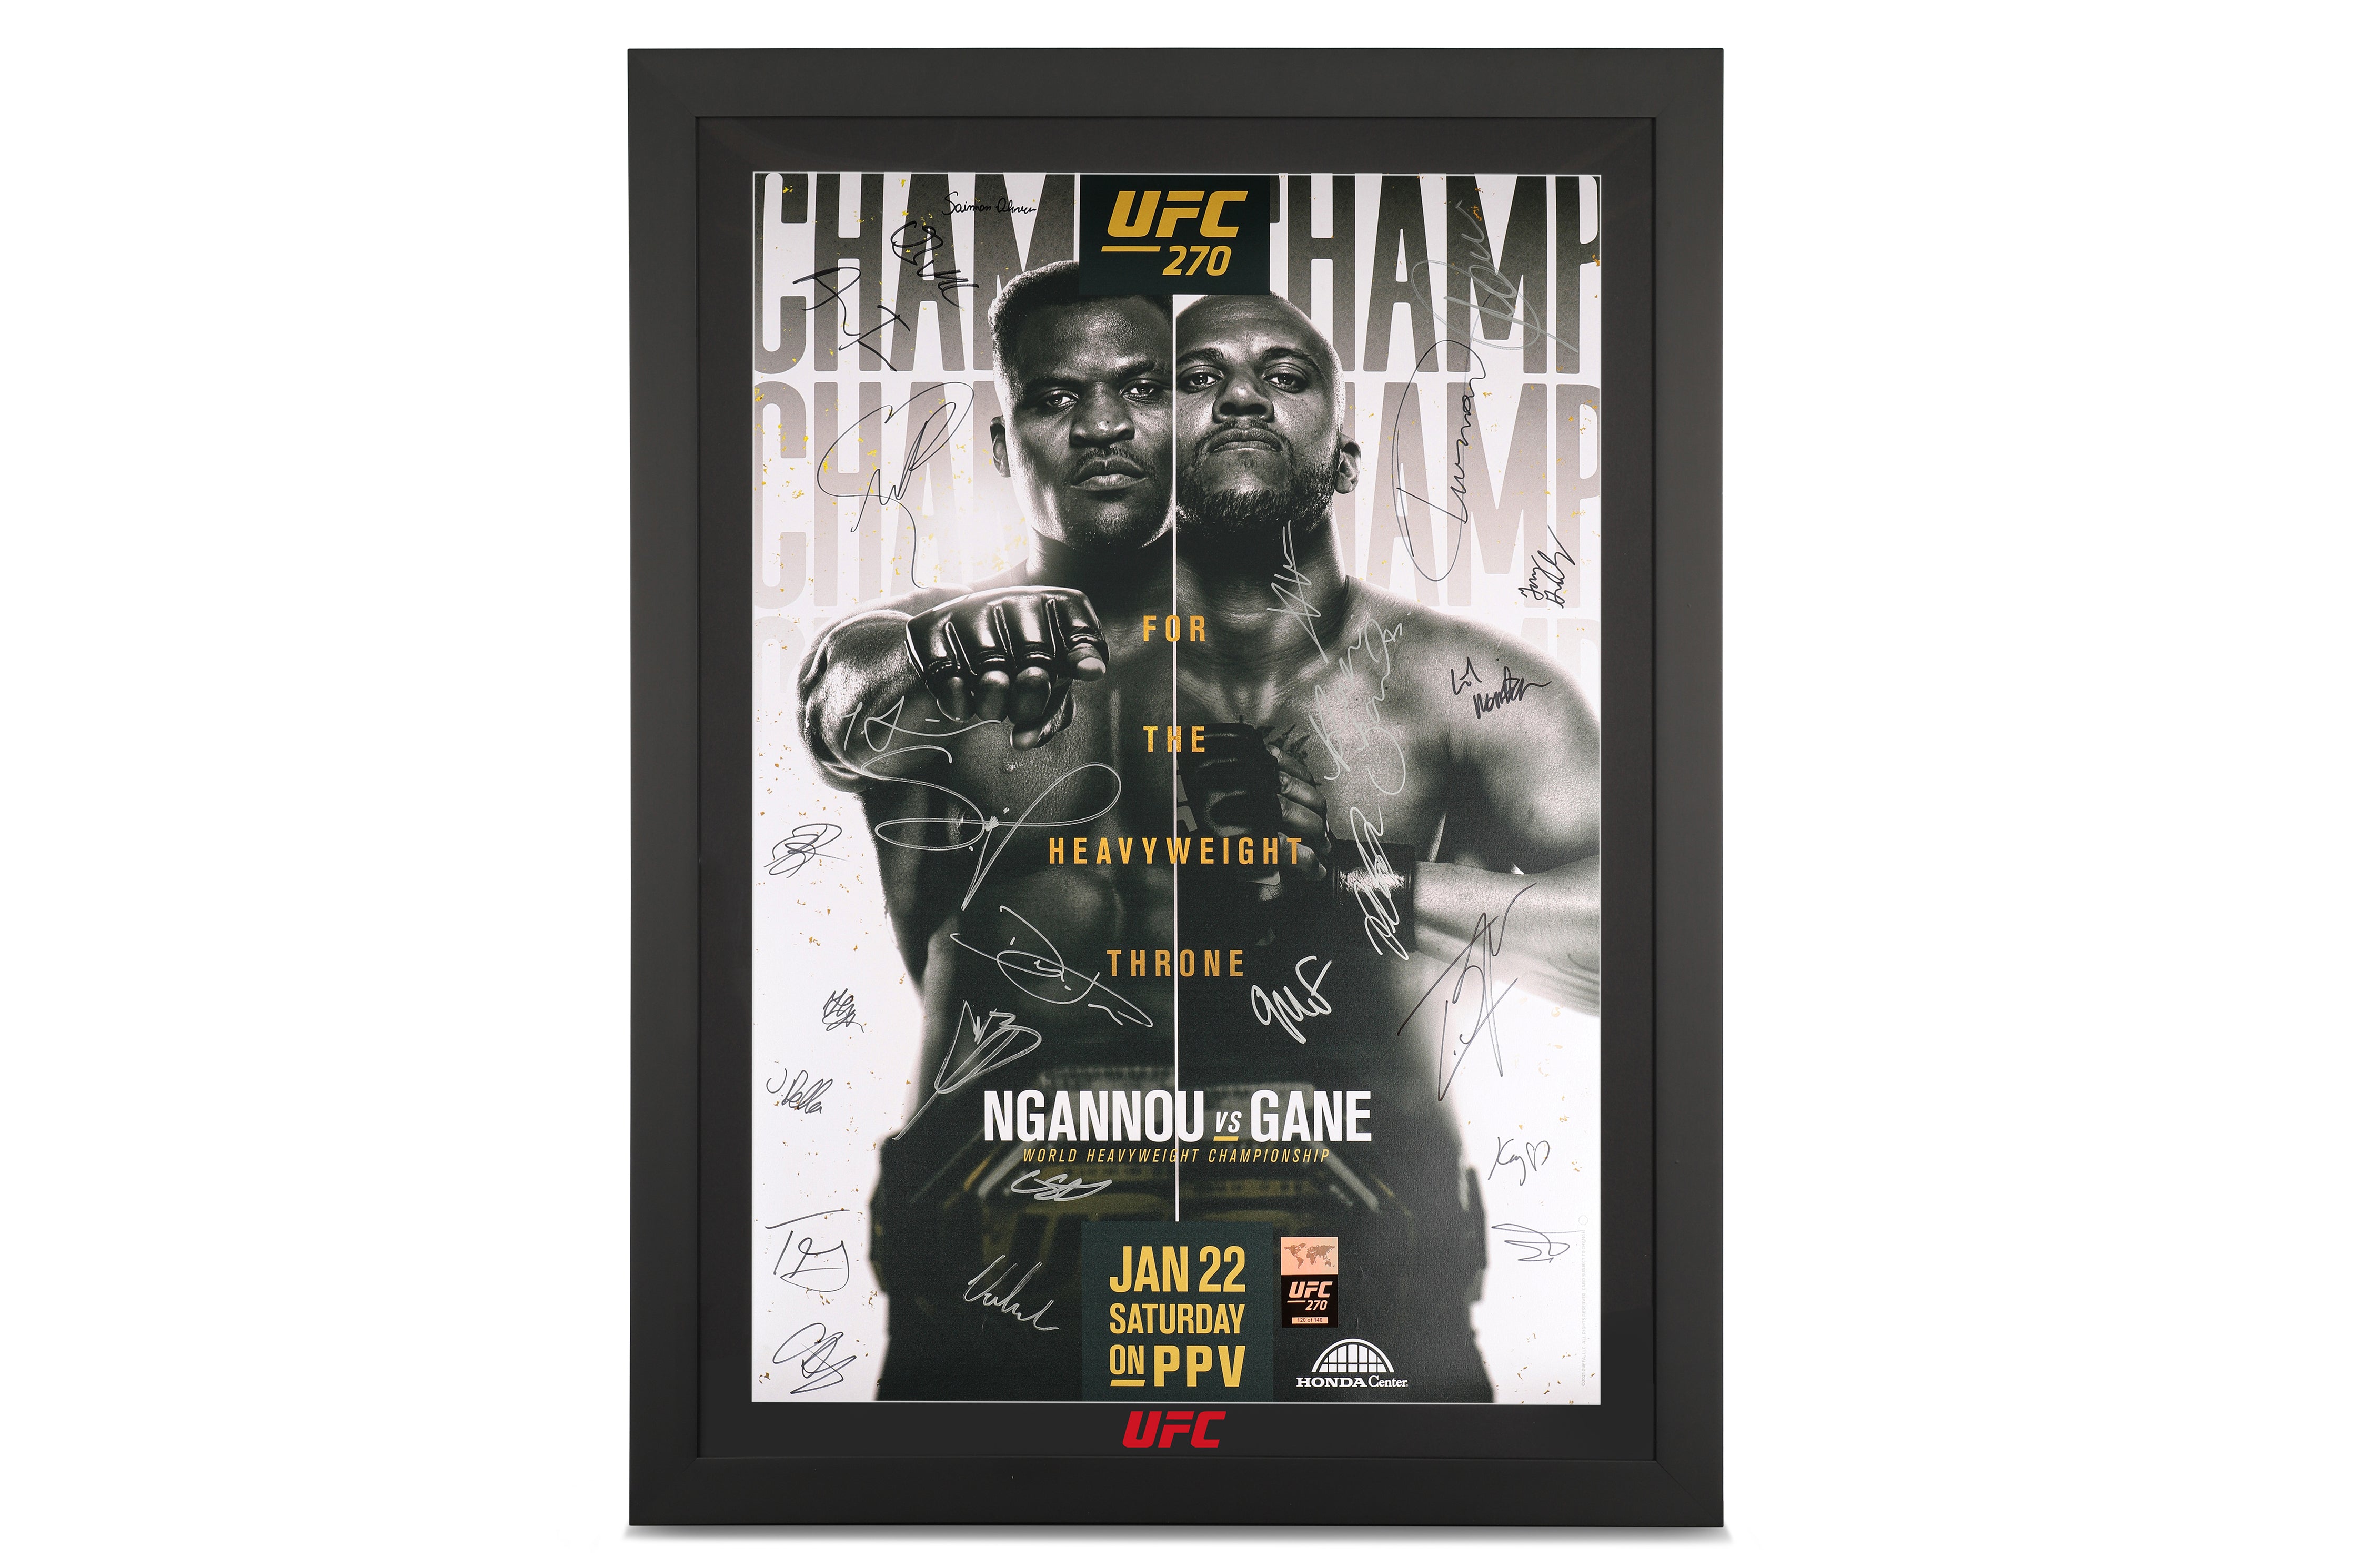 Ngannou vs Gane autographed poster from the UFC 270 fight